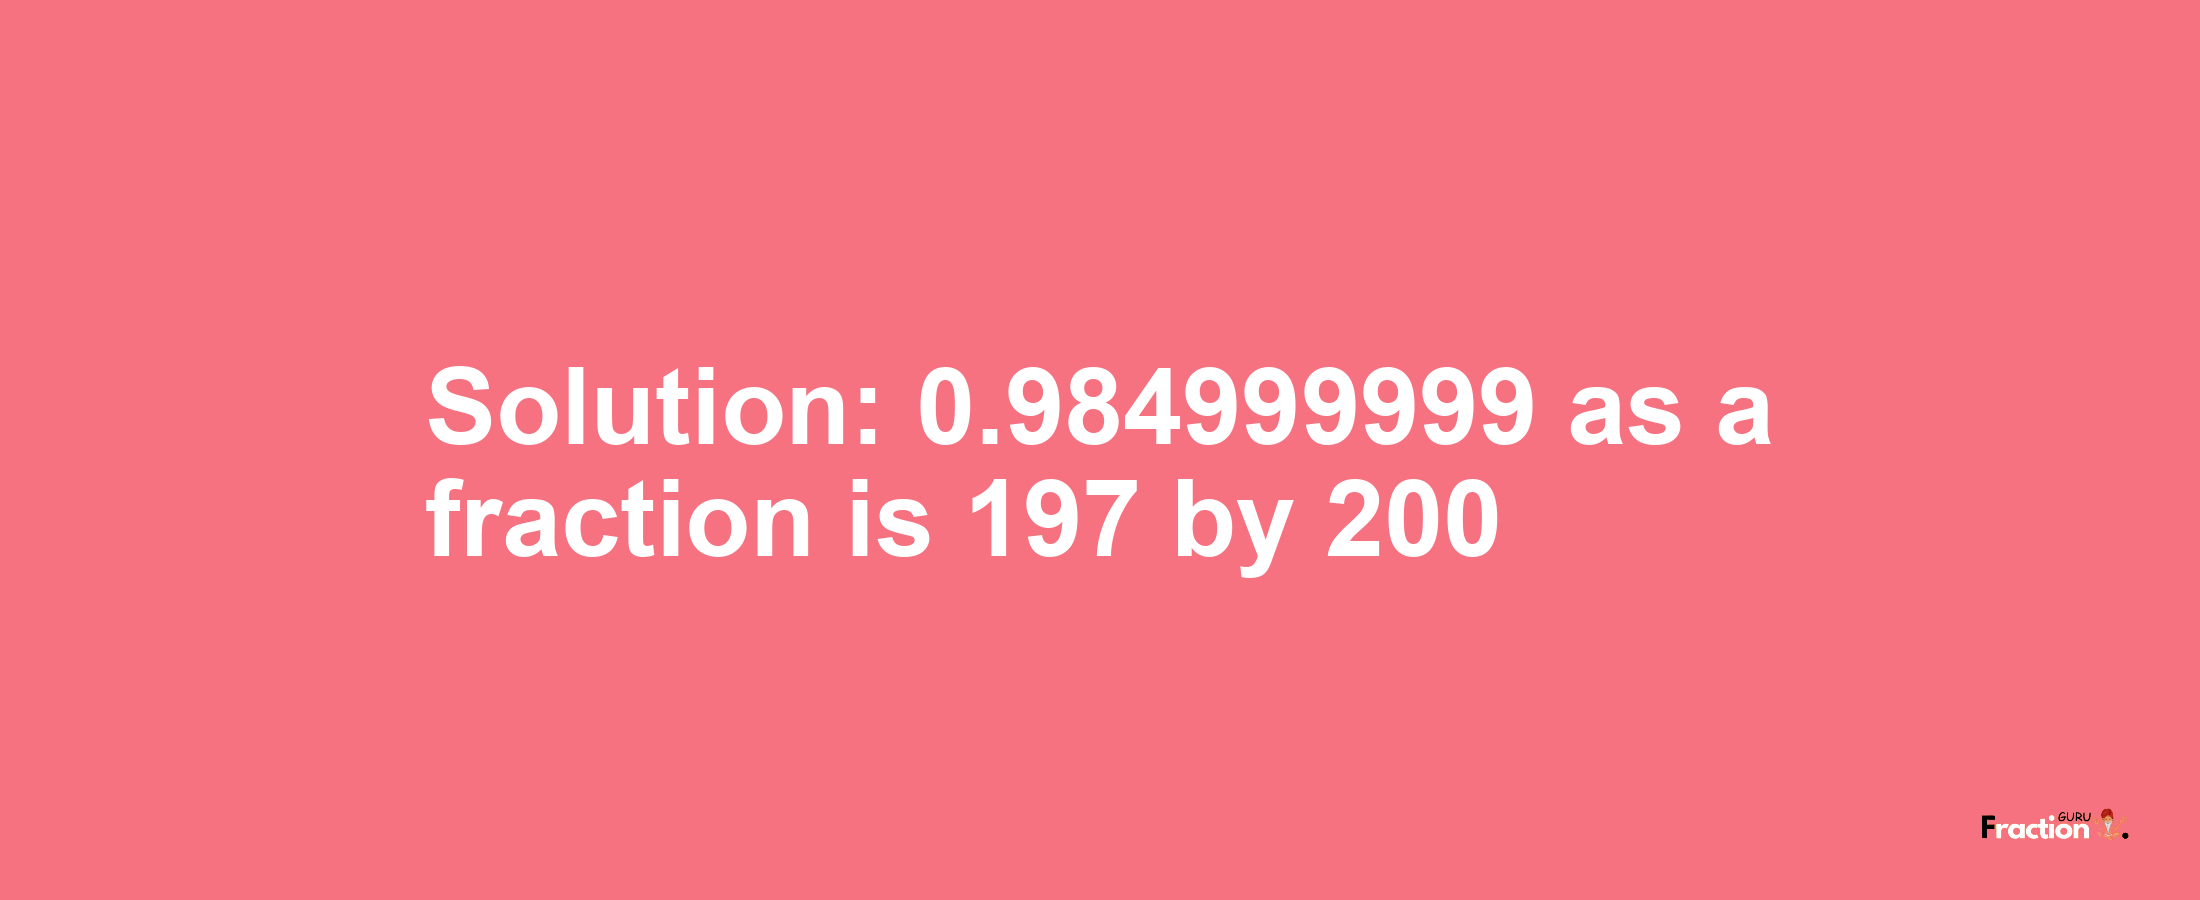 Solution:0.984999999 as a fraction is 197/200